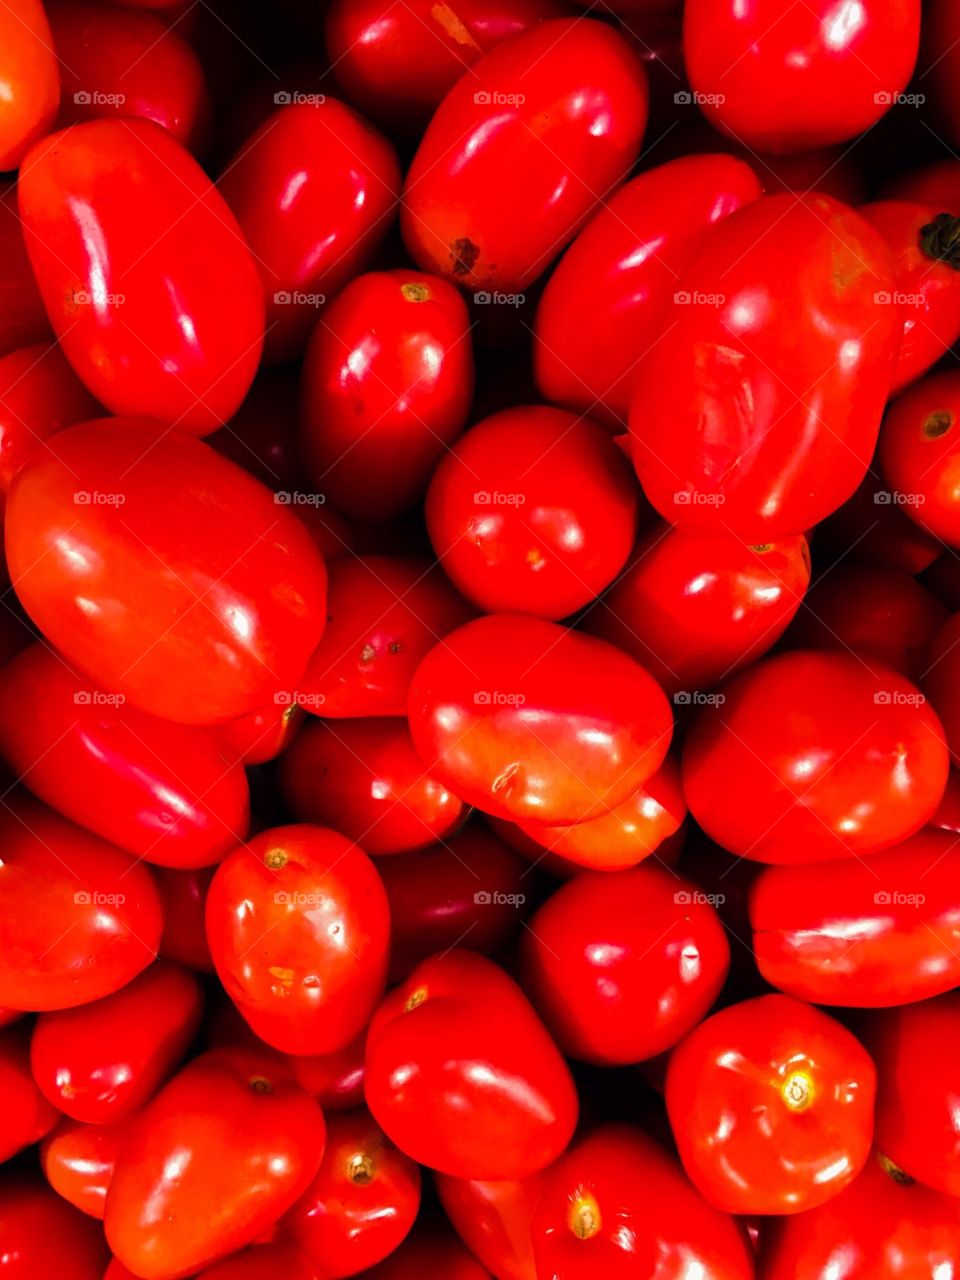 Shiny red Roma tomatoes in the produce department. 